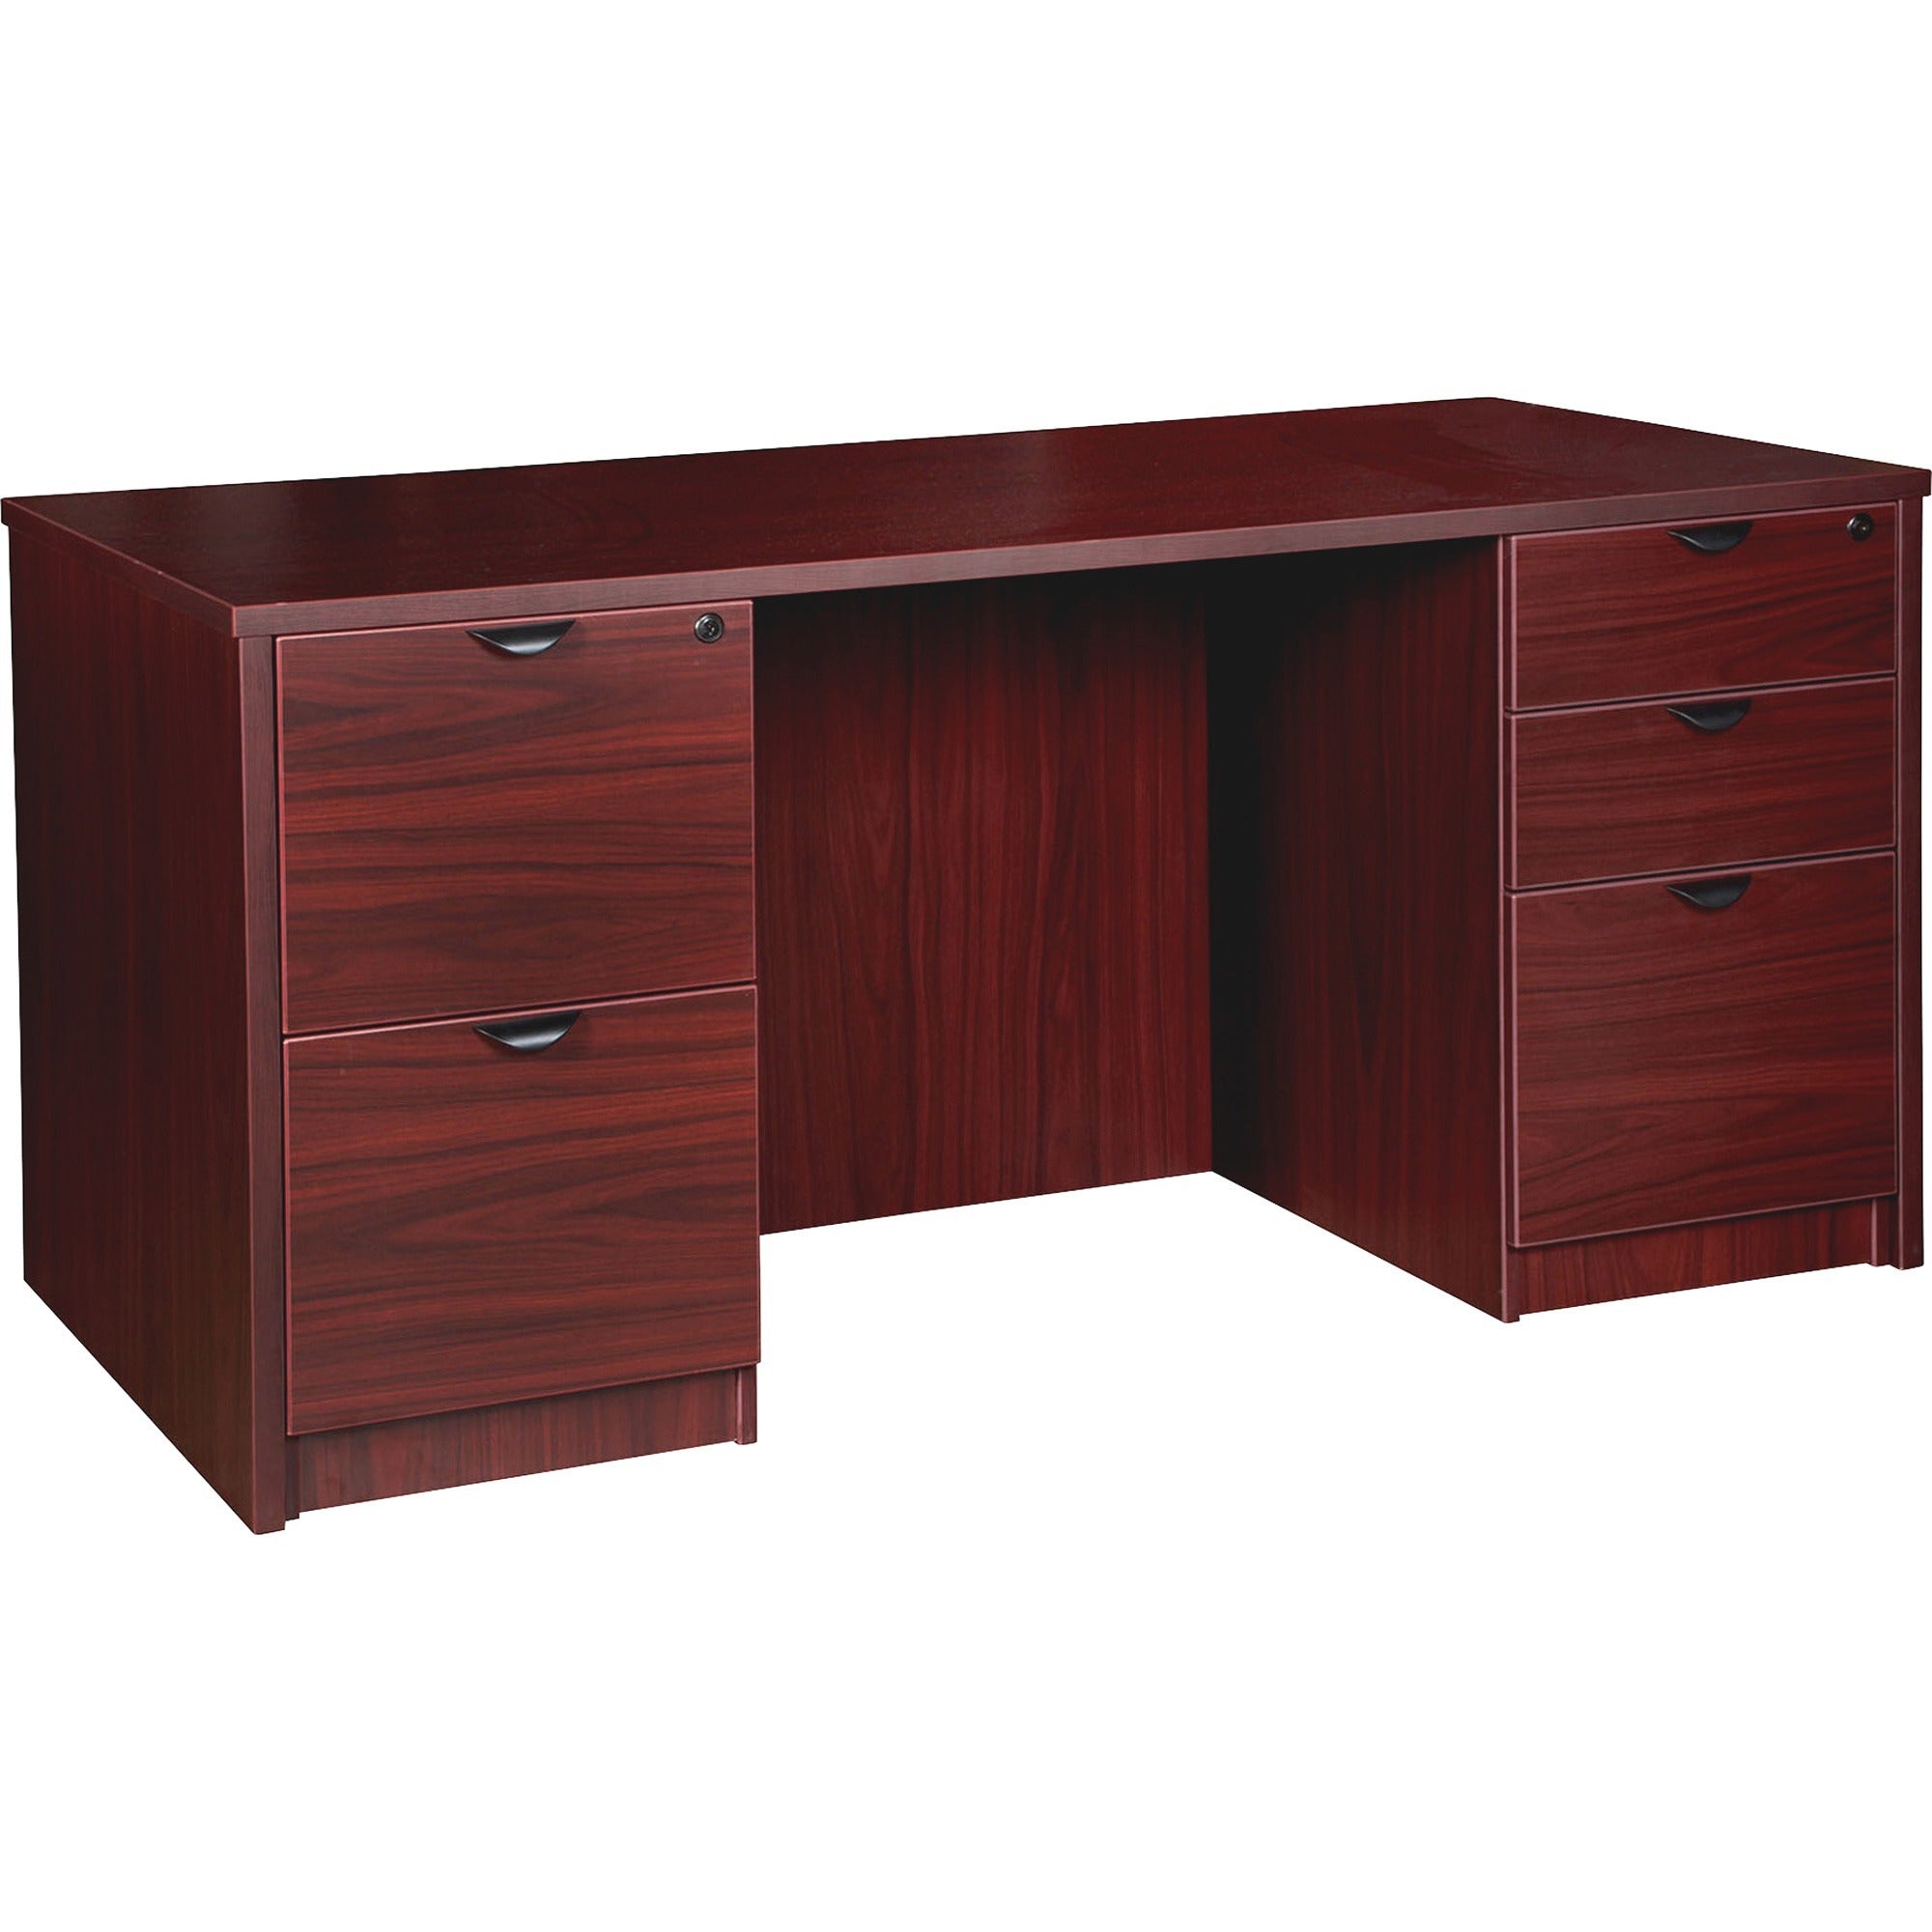 lorell-prominence-20-double-pedestal-desk-1-top-60-x-3029-5-x-file-box-drawers-double-pedestal-on-left-right-side-band-edge-material-particleboard-finish-mahogany-laminate-thermofused-melamine-tfm_llrpd3060dpmy - 1